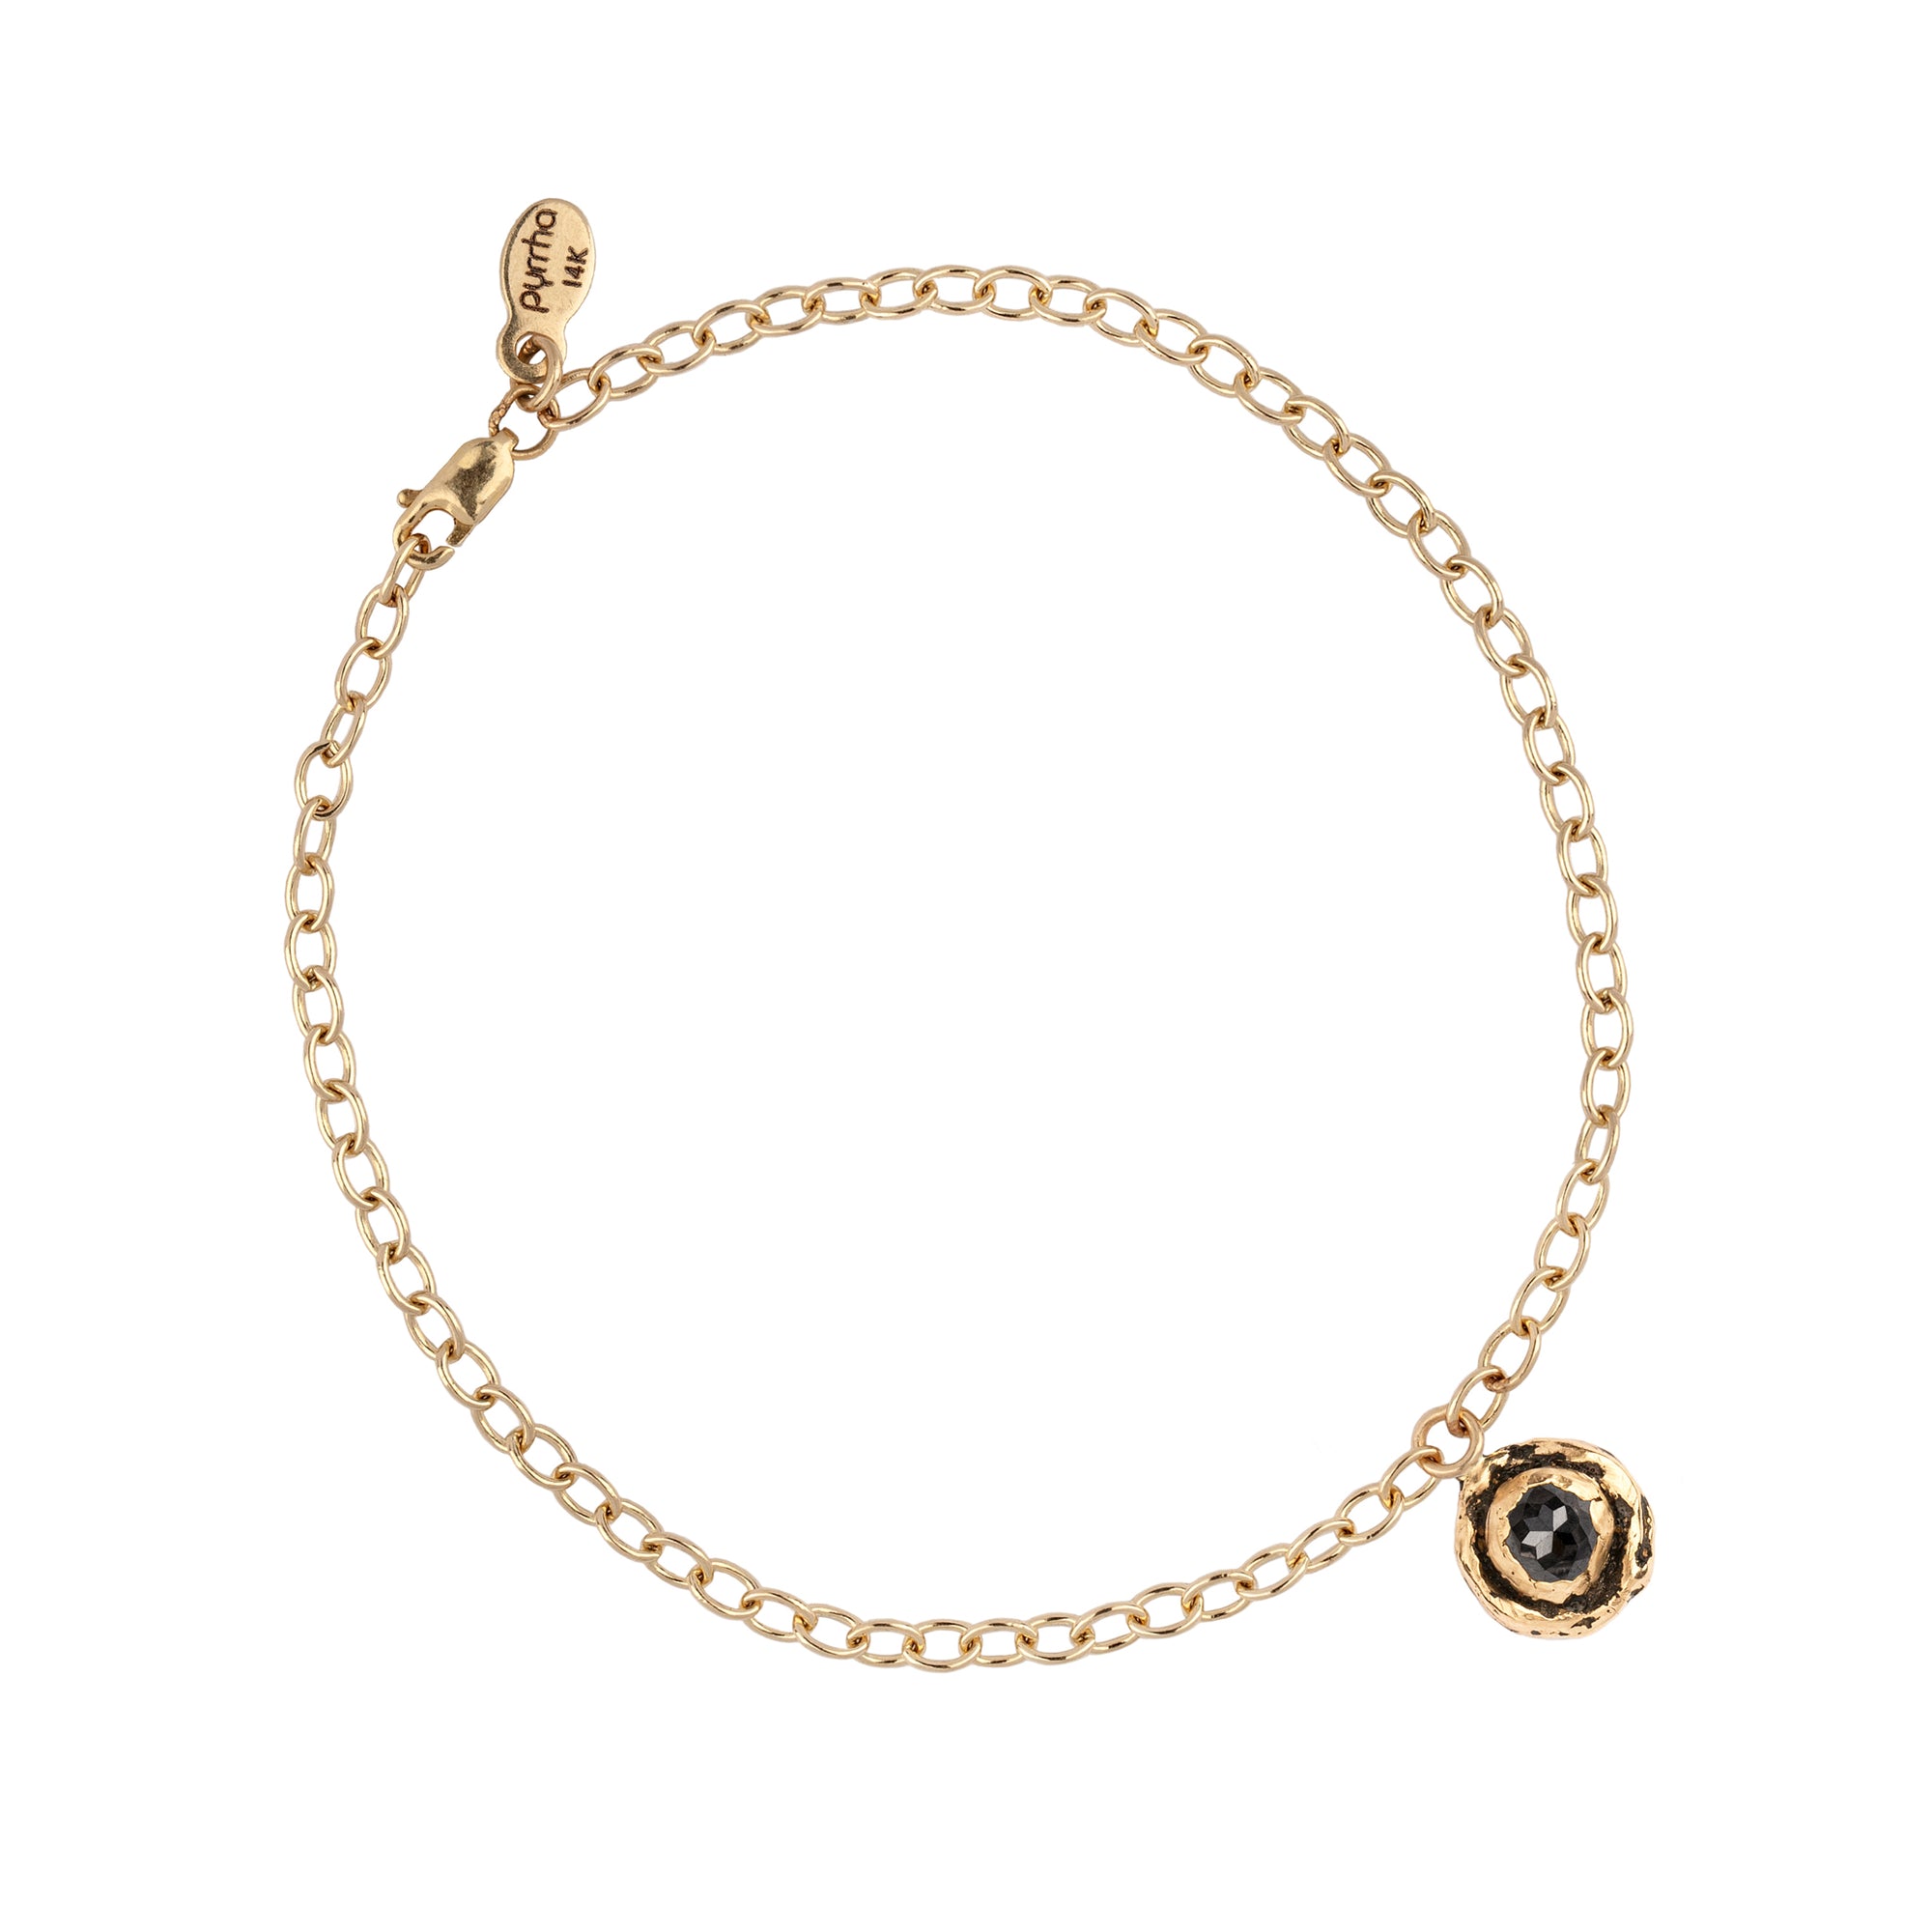 A 14k gold chain bracelet featuring our 14k gold charcoal diamond faceted stone talisman.